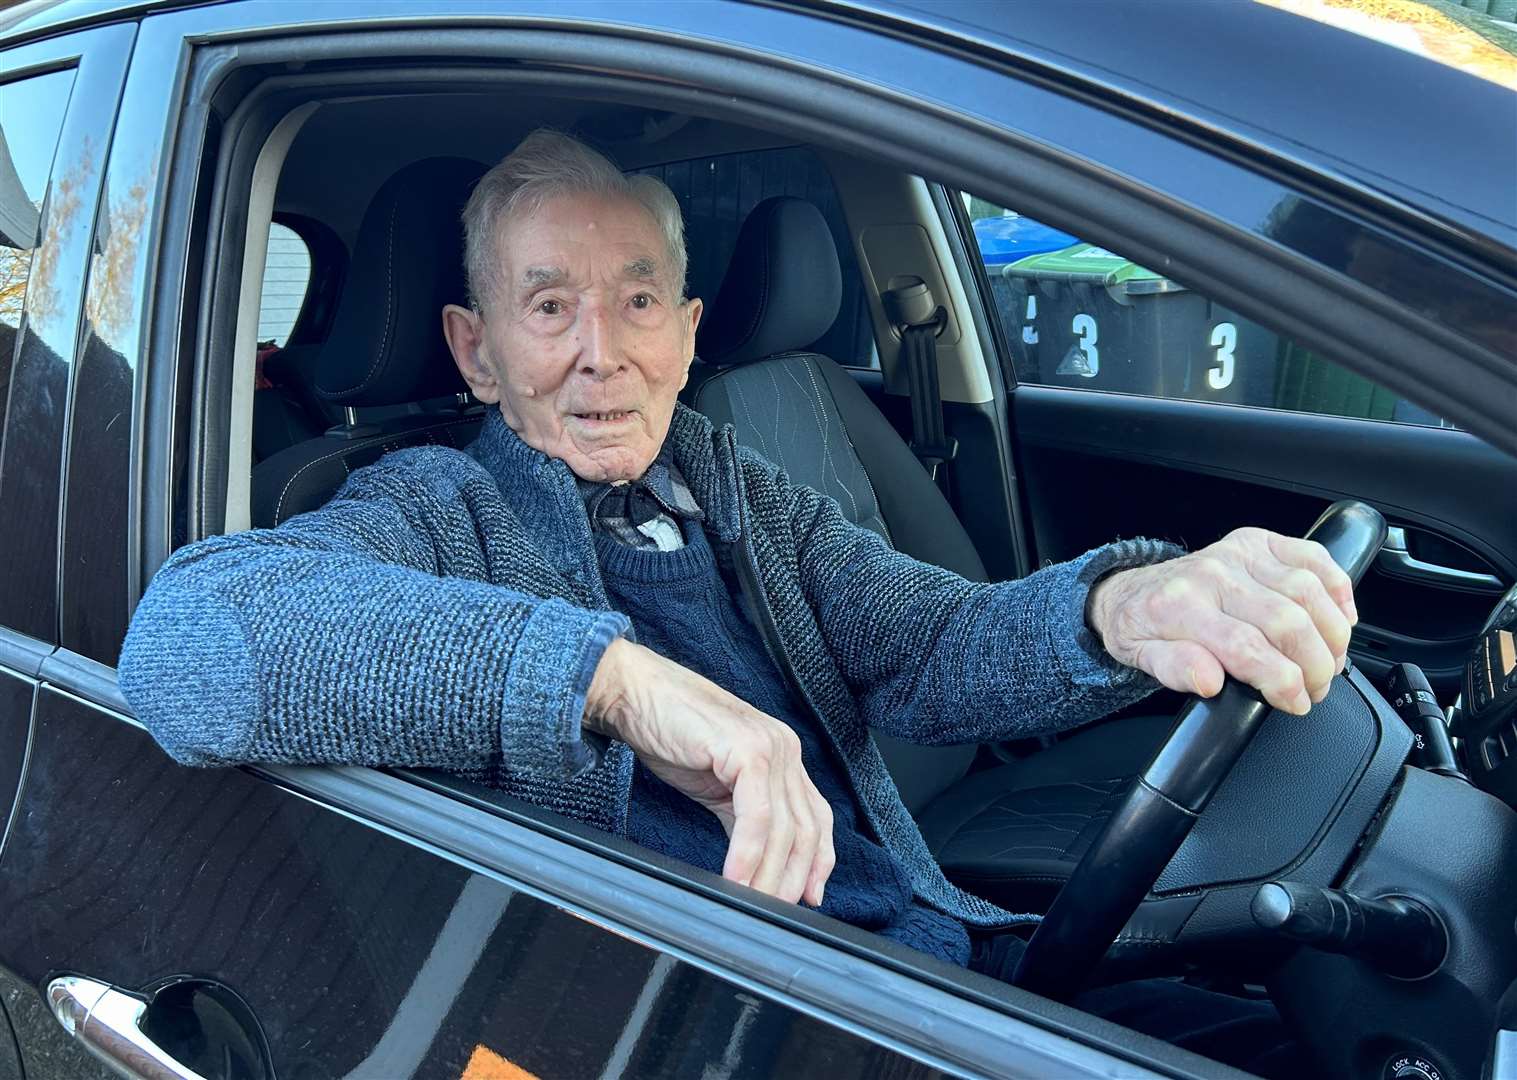 Eric Dixon, from Canterbury, is still driving after reaching his 100th birthday